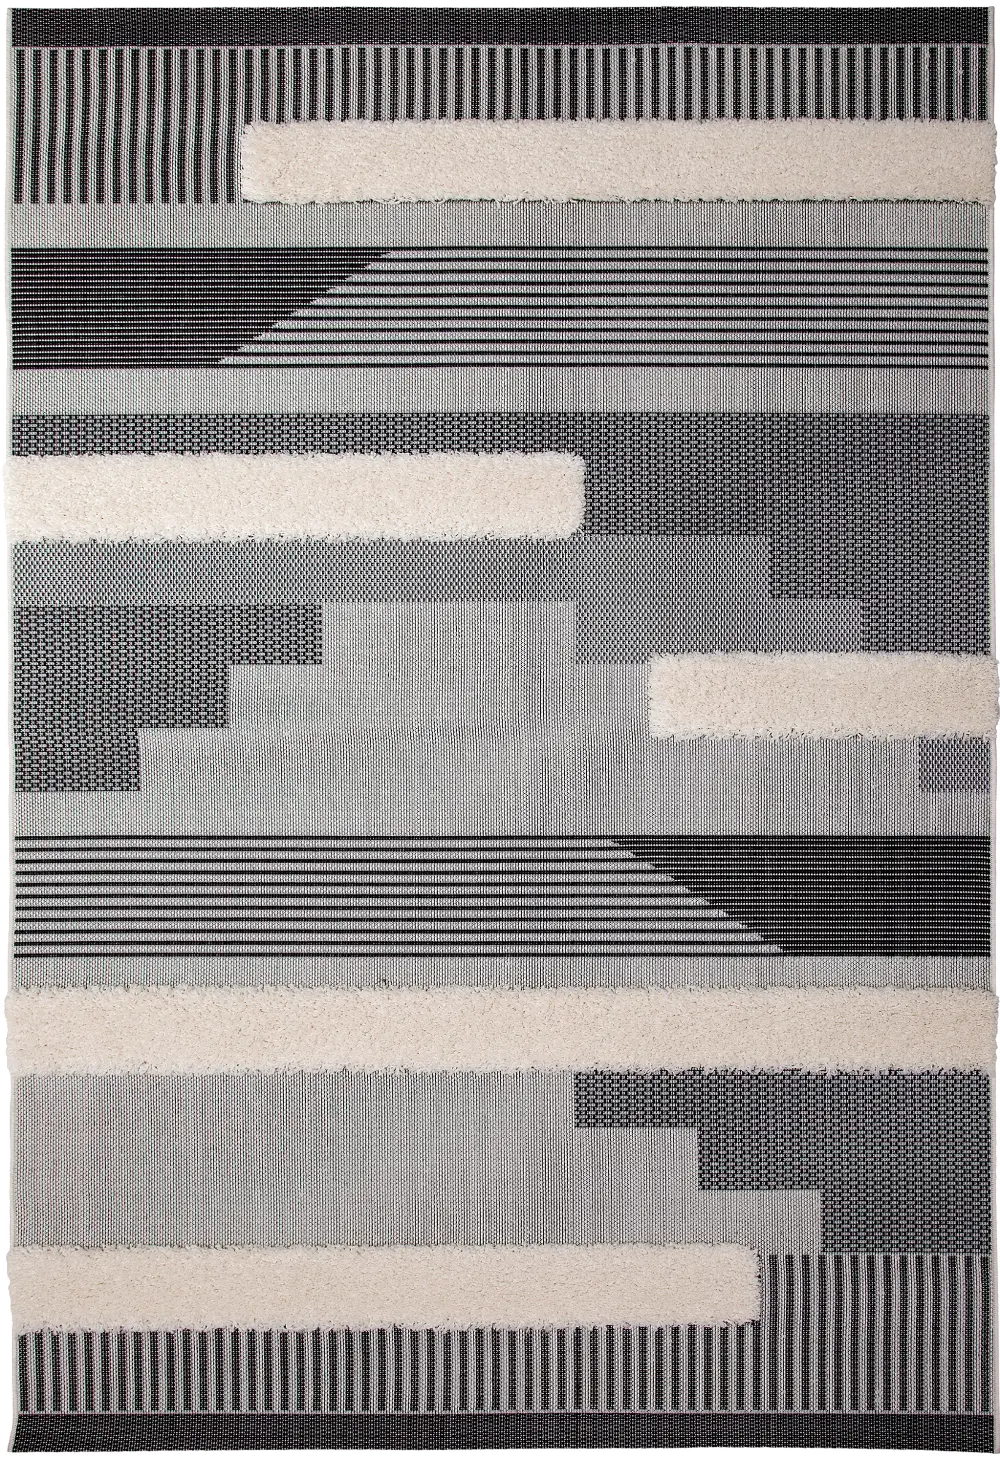 8 x 10 Large Black, White, and Gray Indoor-Outdoor Rug - Playa-1